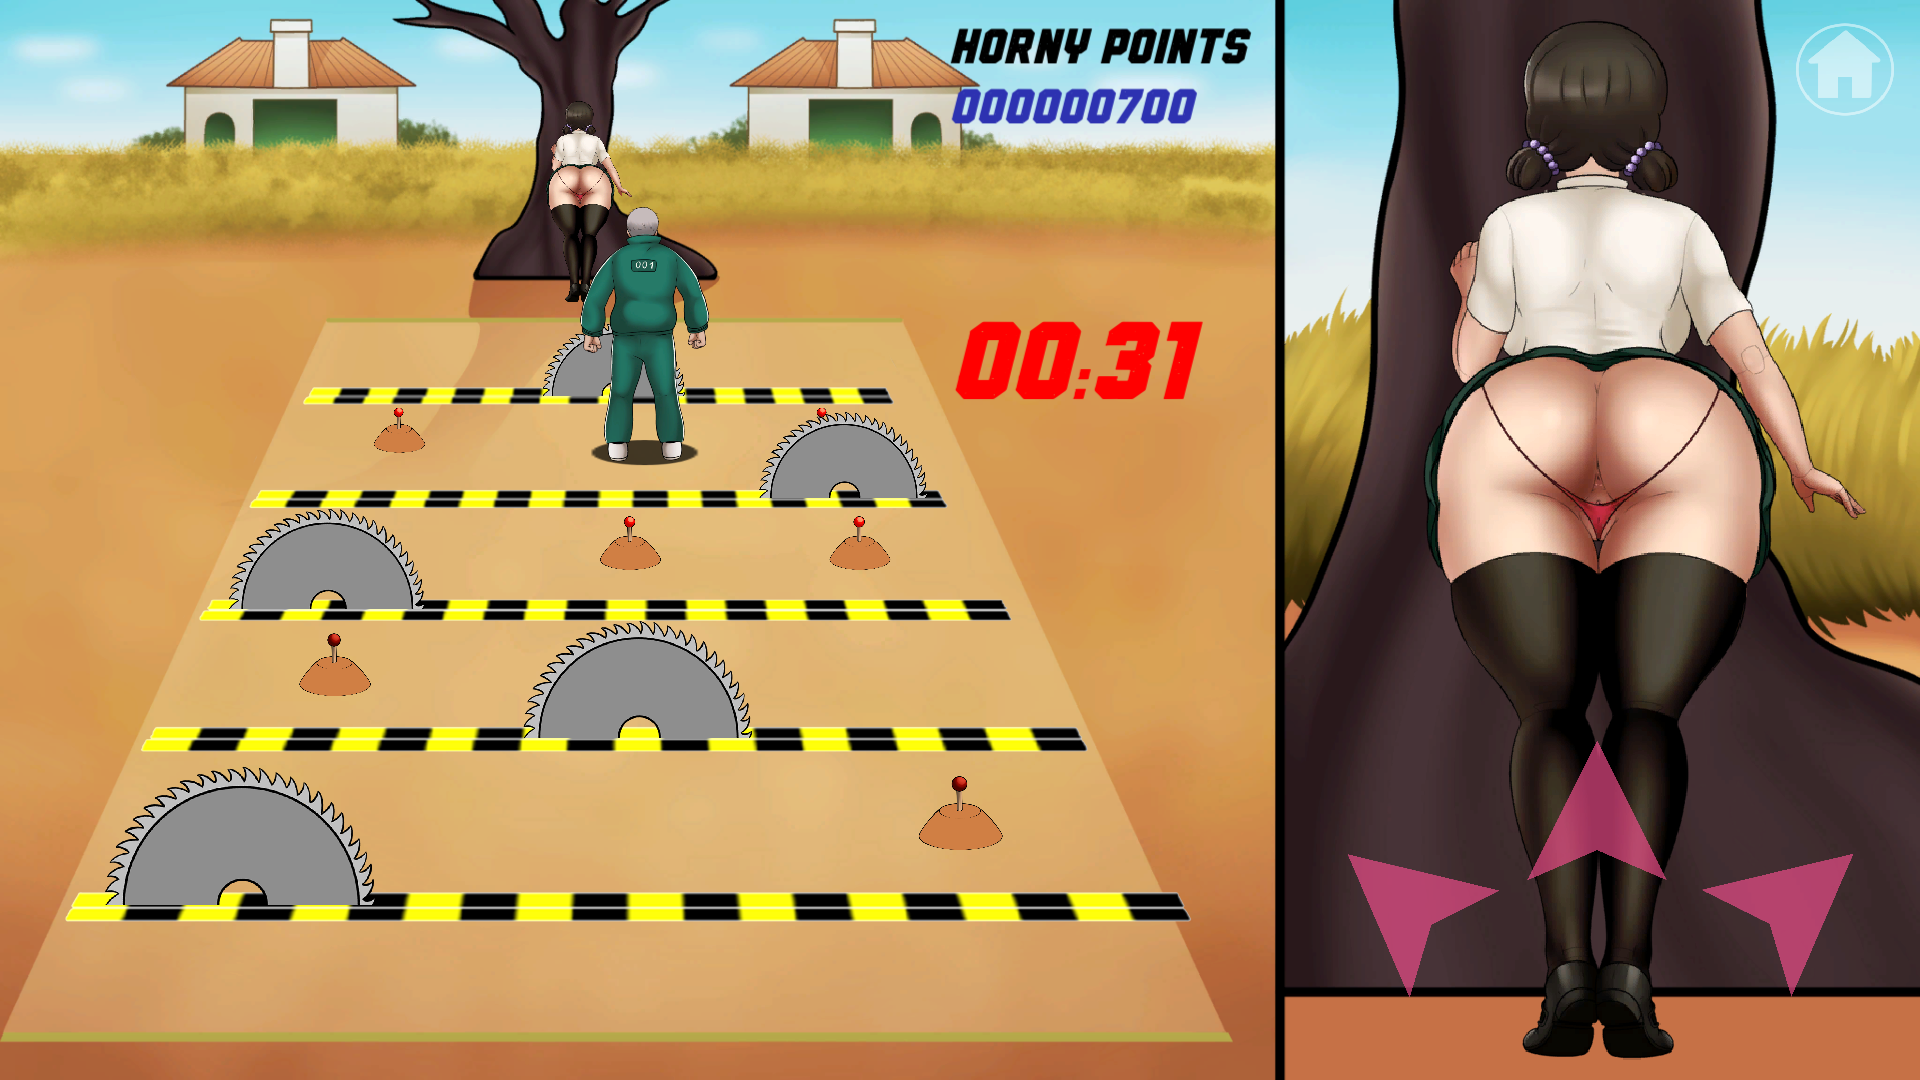 Sex Dawnlod Hony - Squid Horny [COMPLETED] - free game download, reviews, mega - xGames